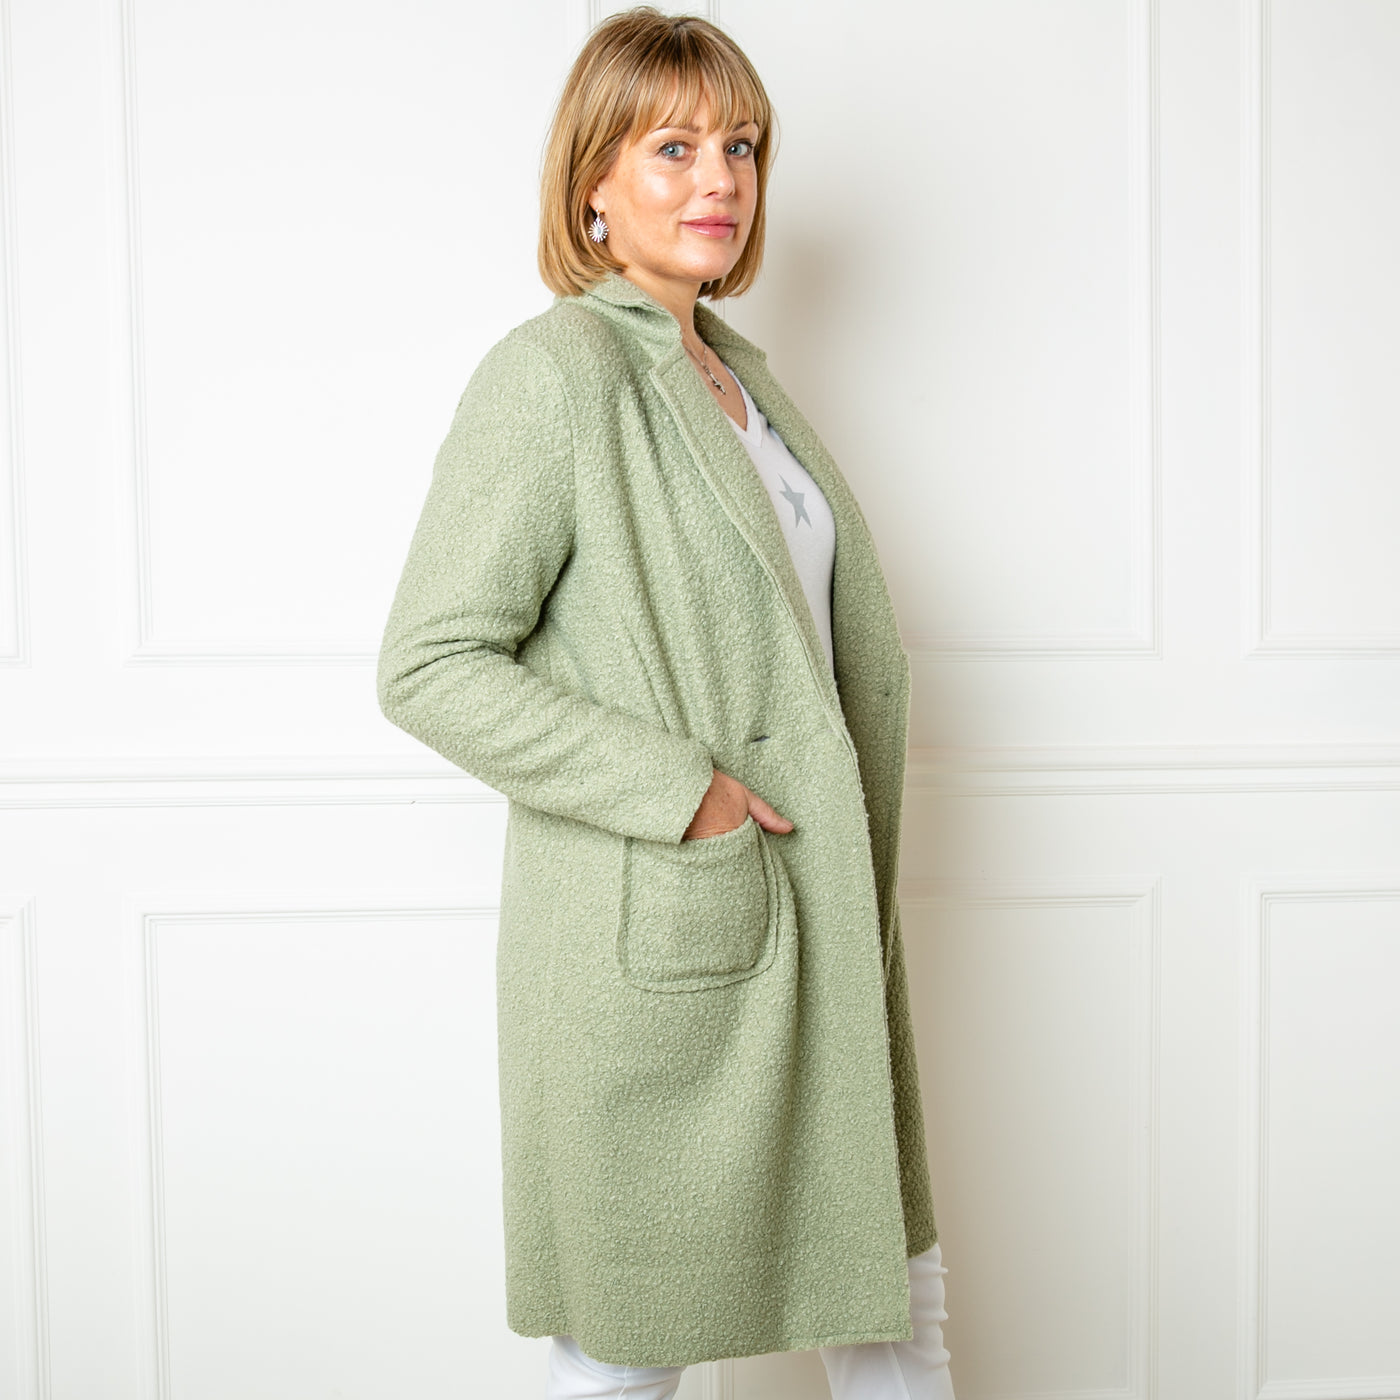 The Double Breasted Coat in sorbet green with a shirt collar, long sleeves and a double breasted button fastening